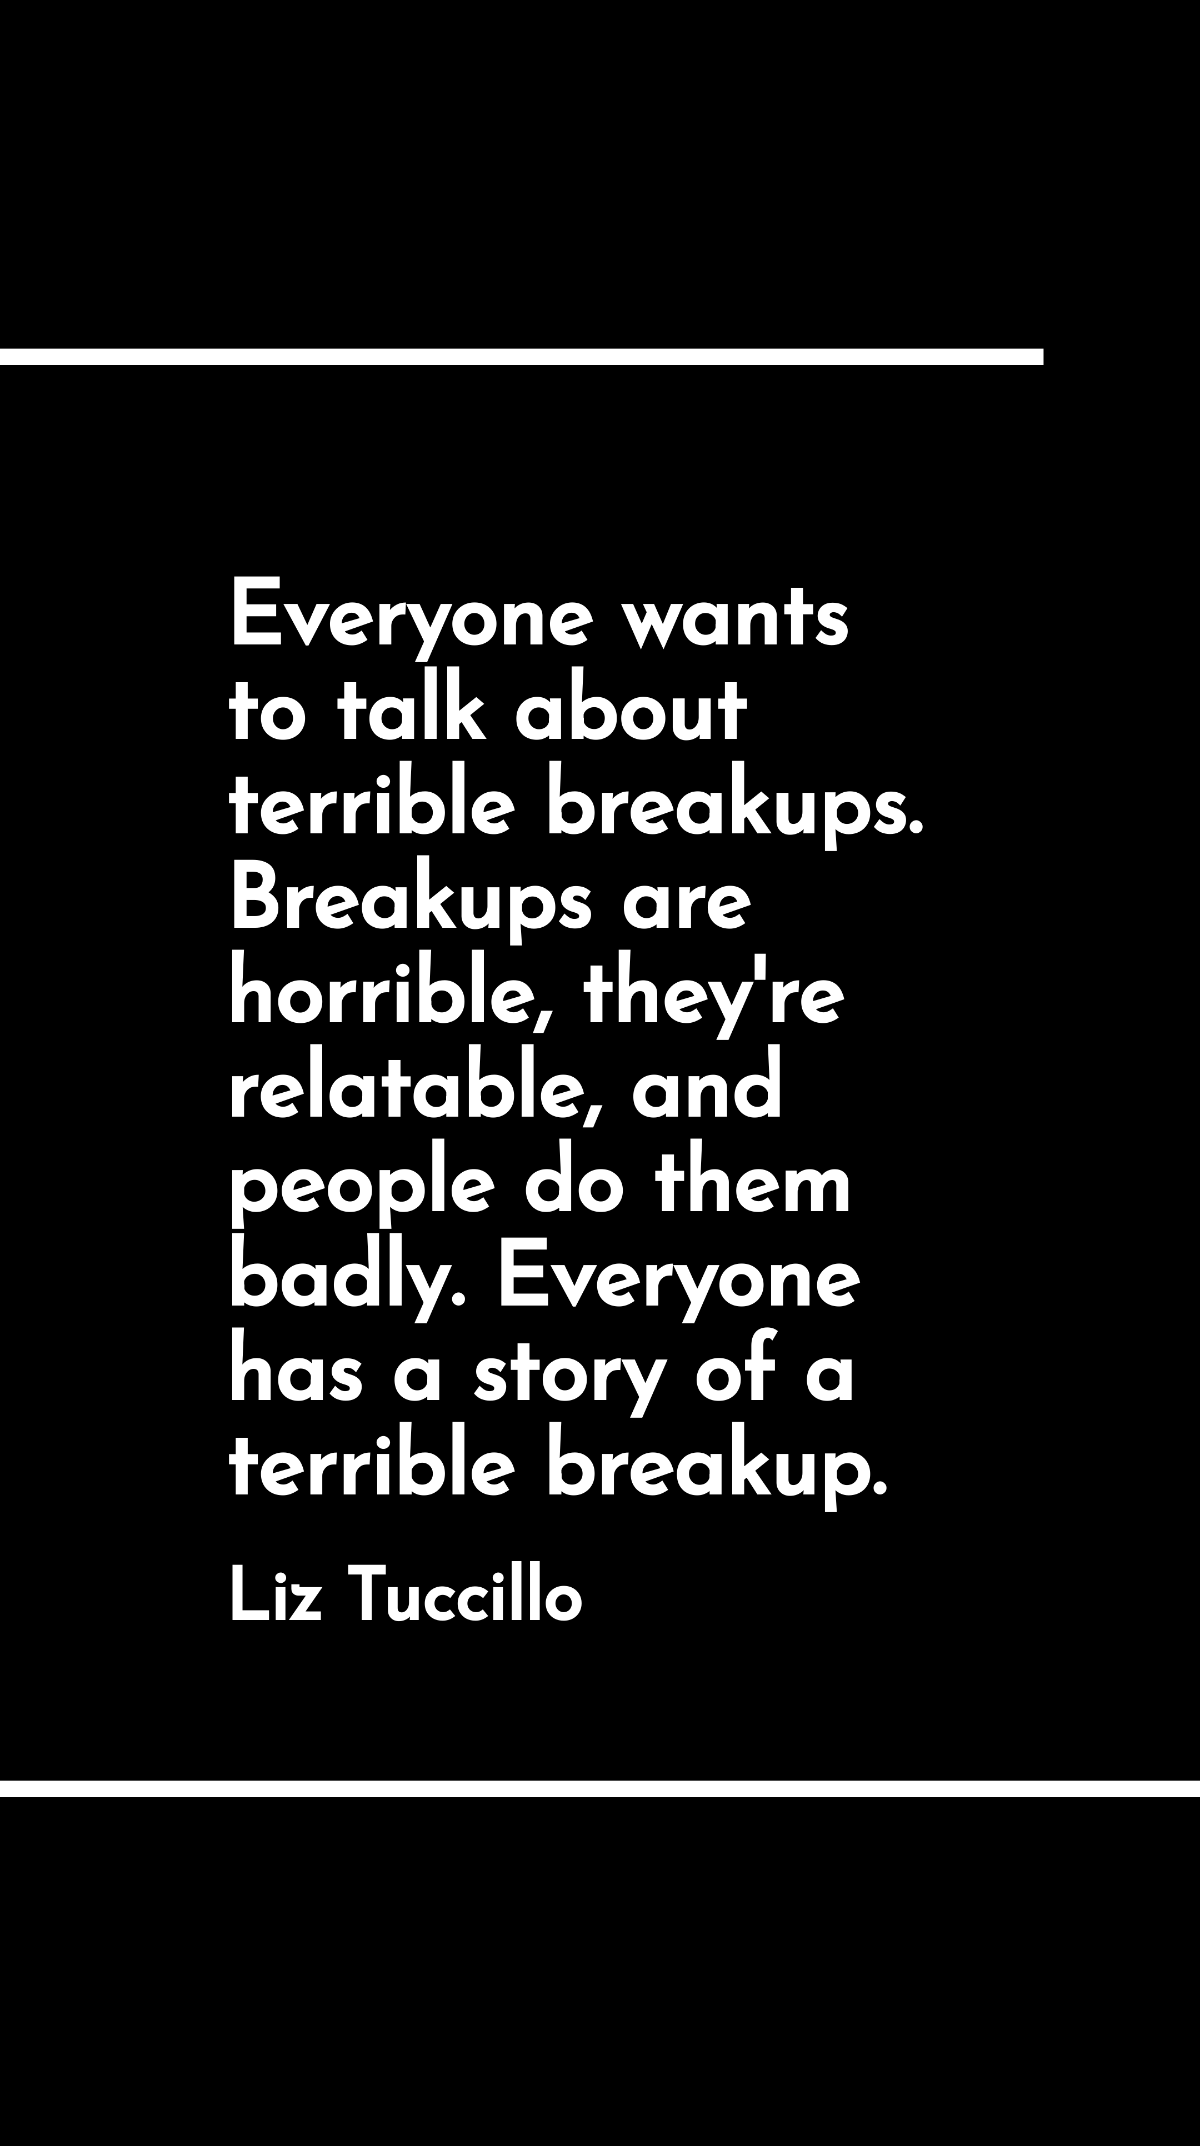 Free Liz Tuccillo - Everyone wants to talk about terrible breakups. Breakups are horrible, they're relatable, and people do them badly. Everyone has a story of a terrible breakup. Template